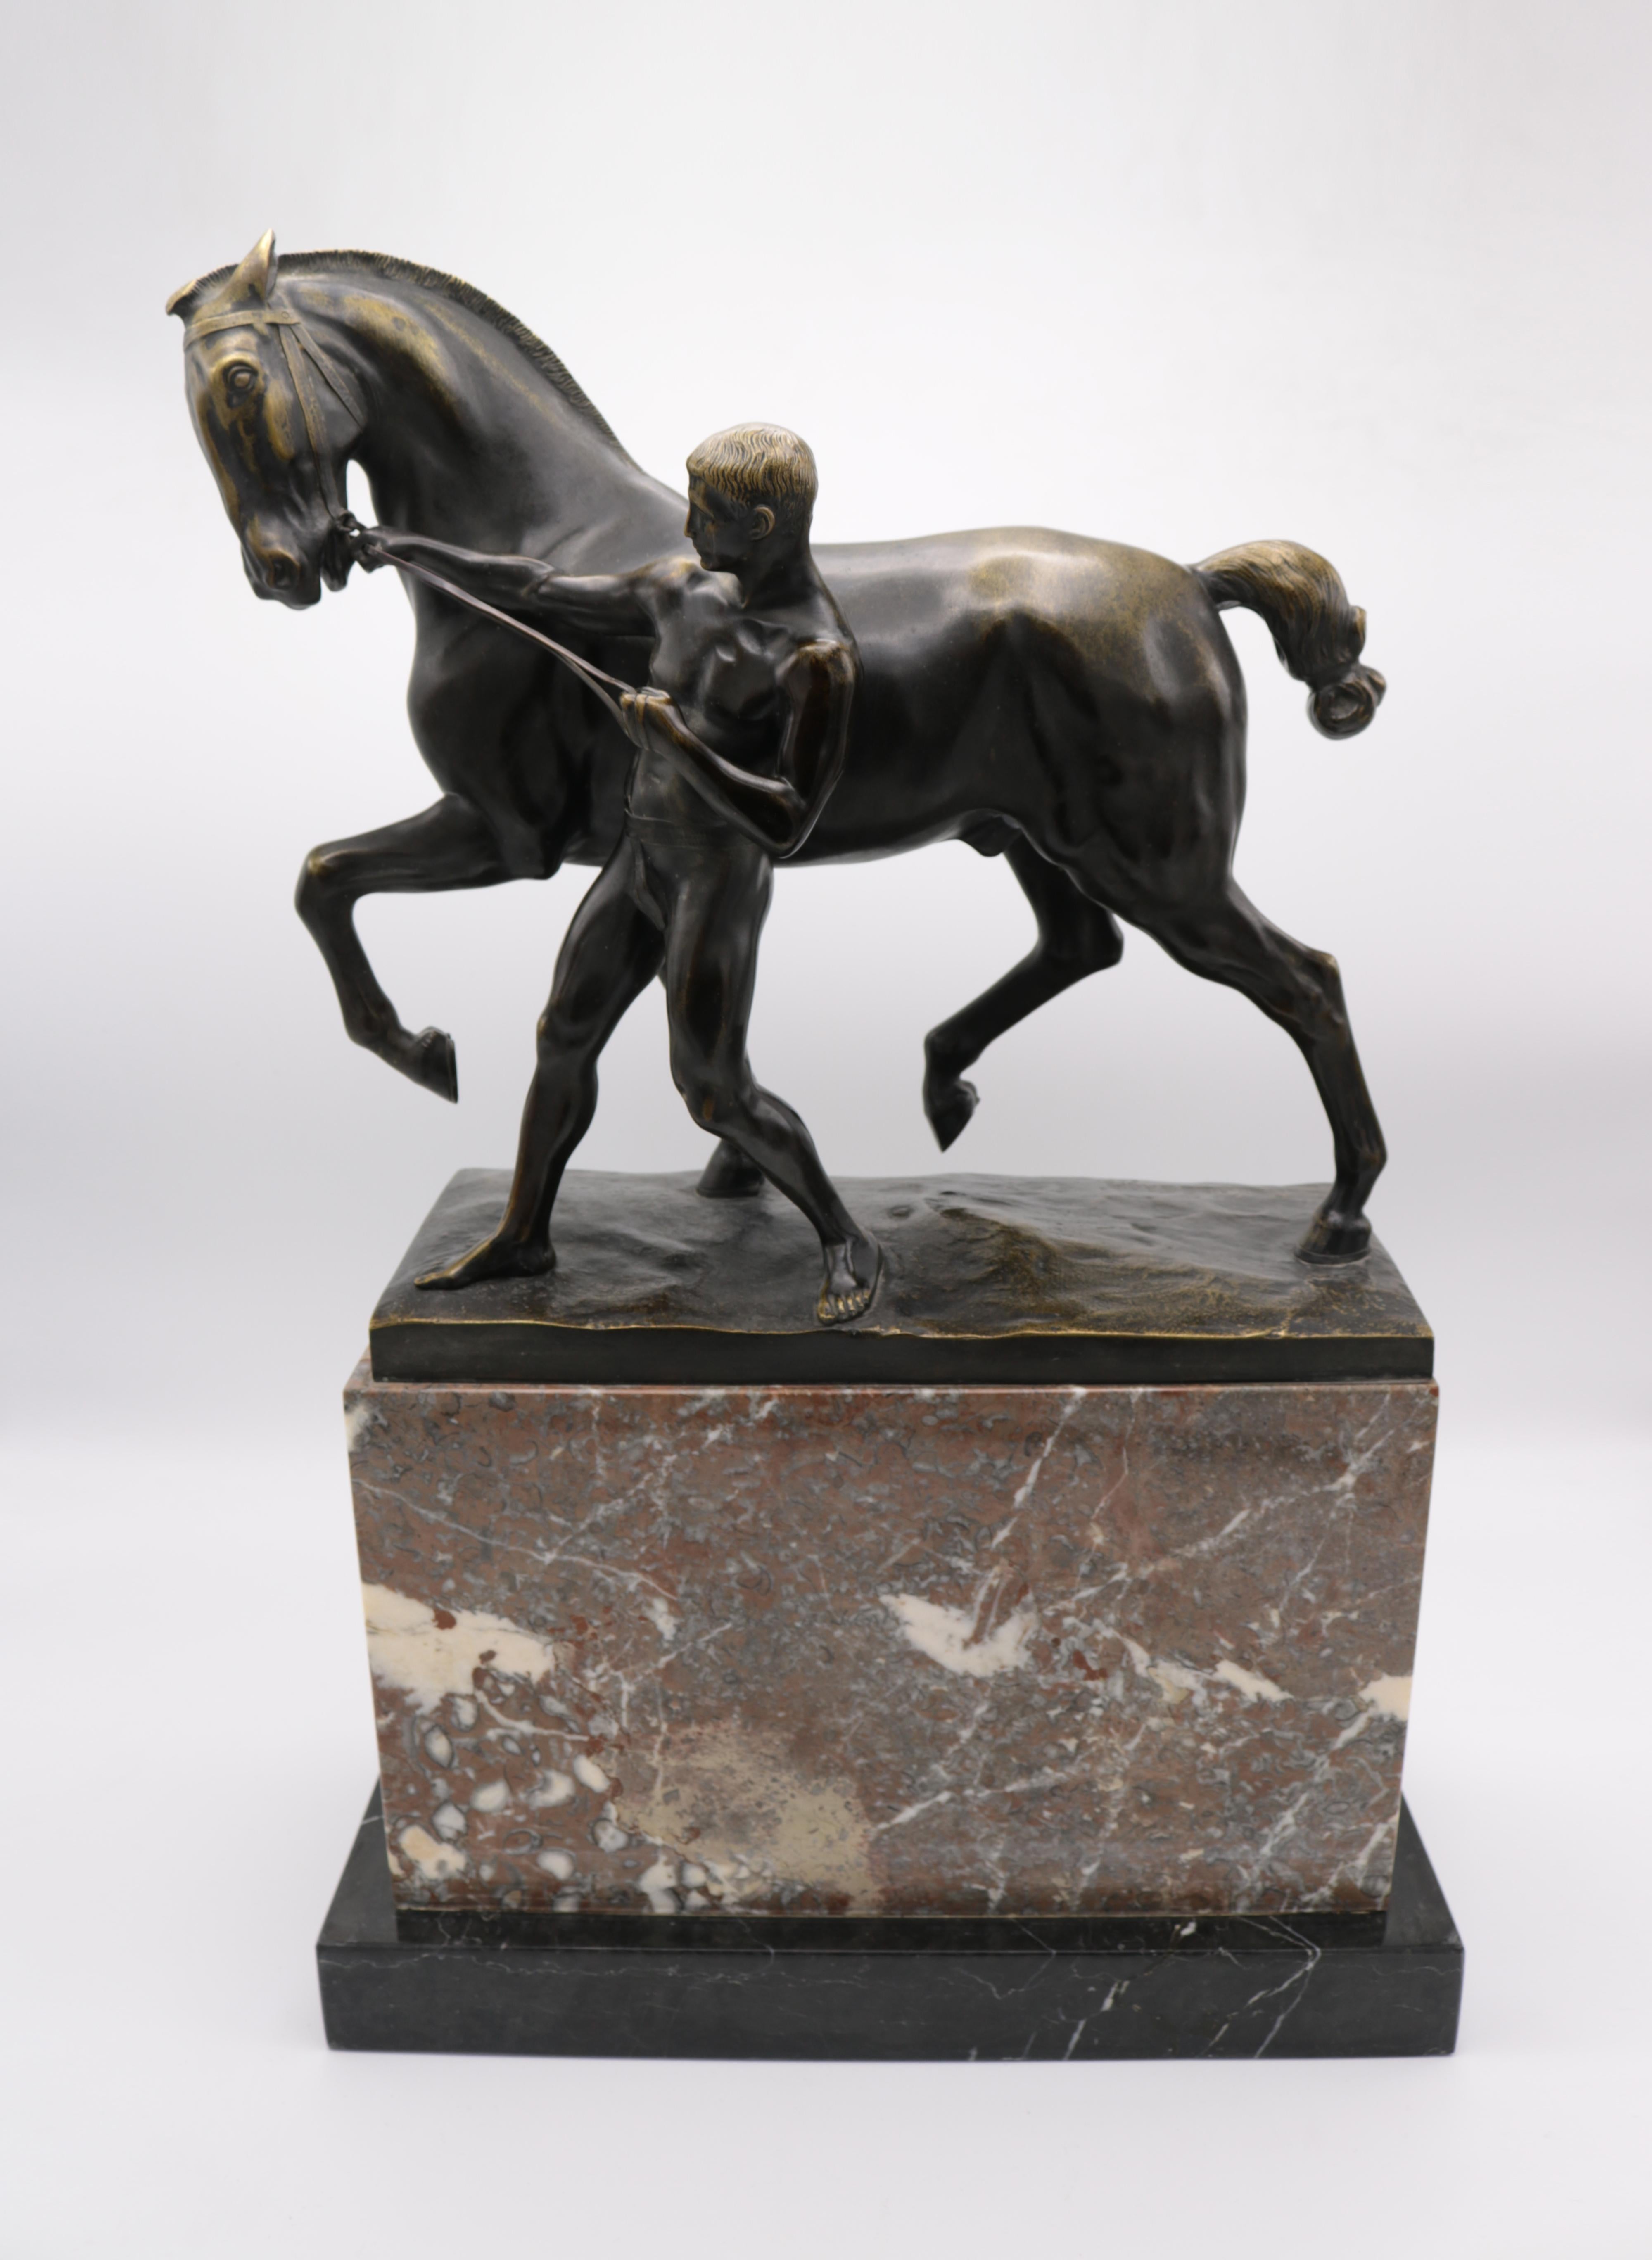 Fine solid bronze sculpture by Rudolff Kaesbach of a man pulling the reigns of a horse. 
Solid bronze mounted on a marble base. 
Signed: R. Kaesbach, Berlin.